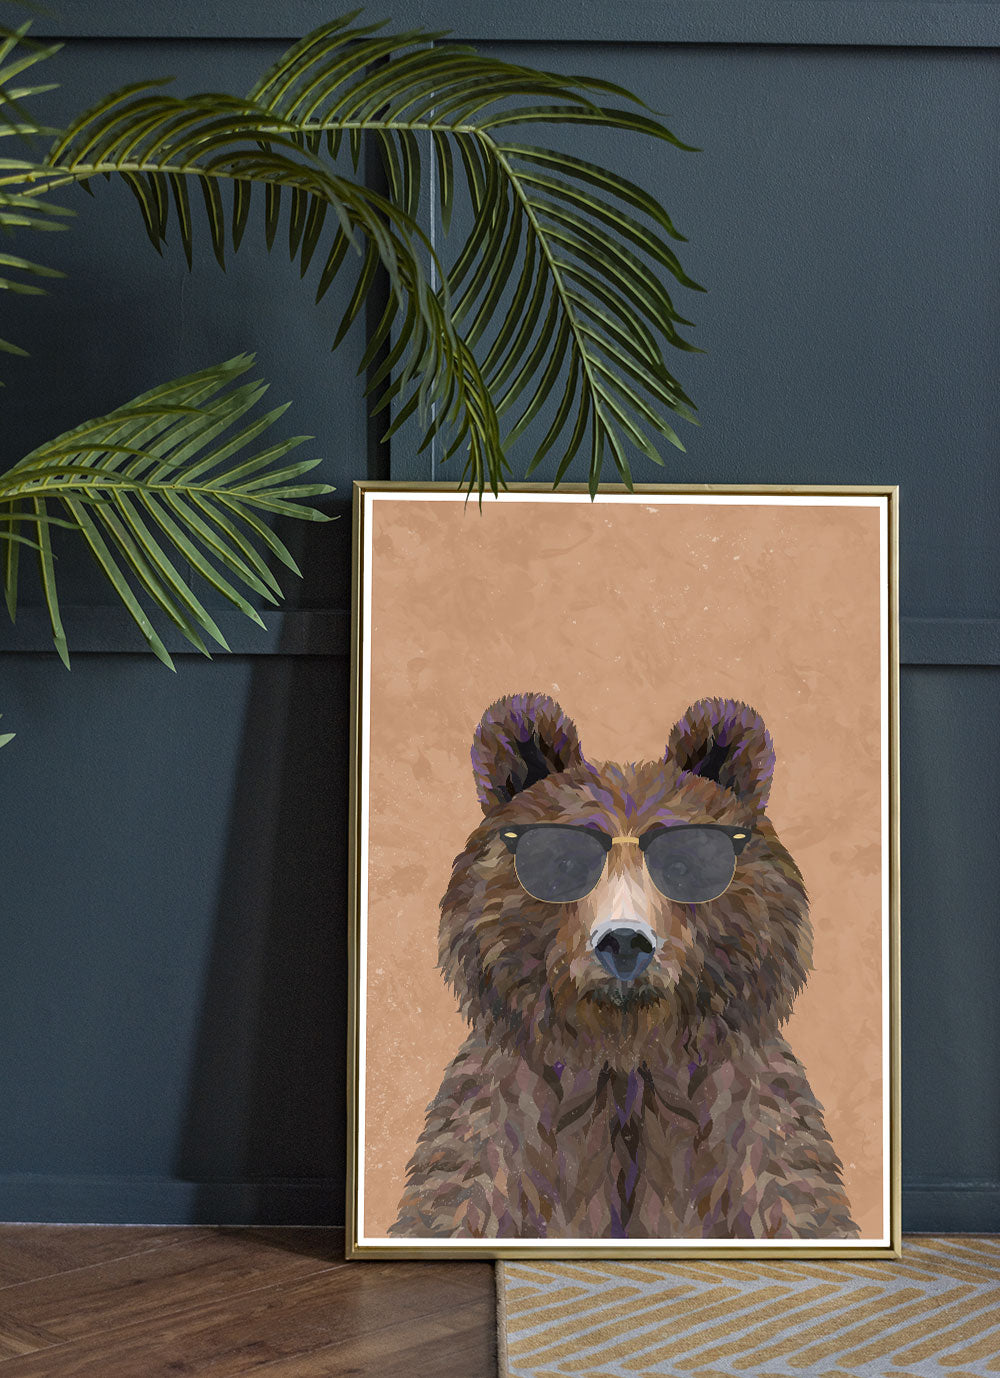 Bear Style Portrait Print in a quirky interior framed in gold by Sarah Manovski